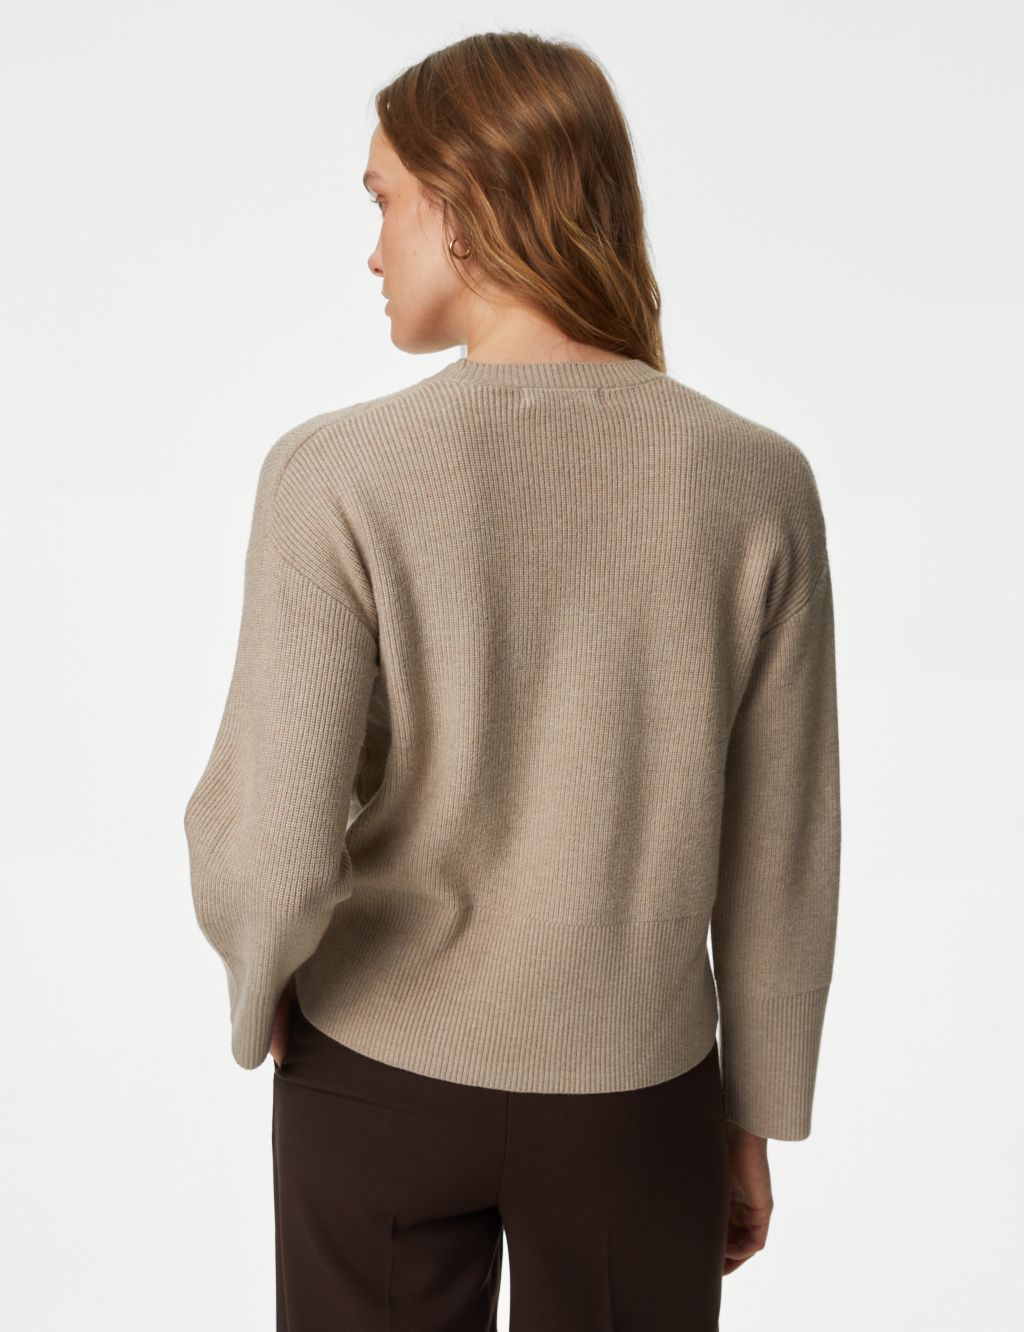 Soft Touch Textured Crew Neck Jumper image 5